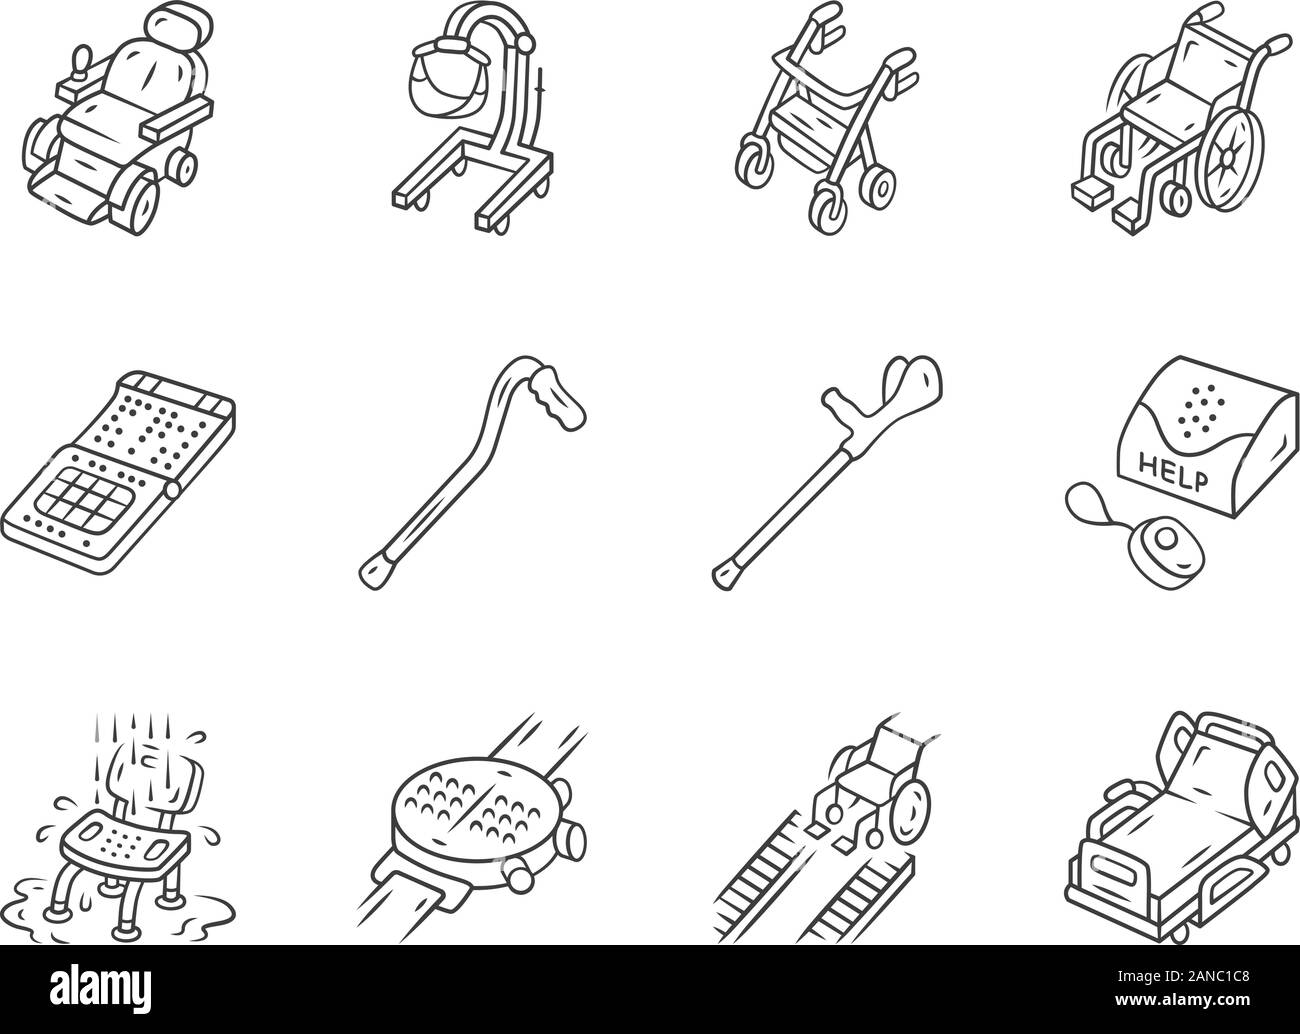 Disabled devices linear icons set. Mobility aid, handicapped medical equipment. Facilities for paralyzed, old people. Thin line contour symbols. Isola Stock Vector